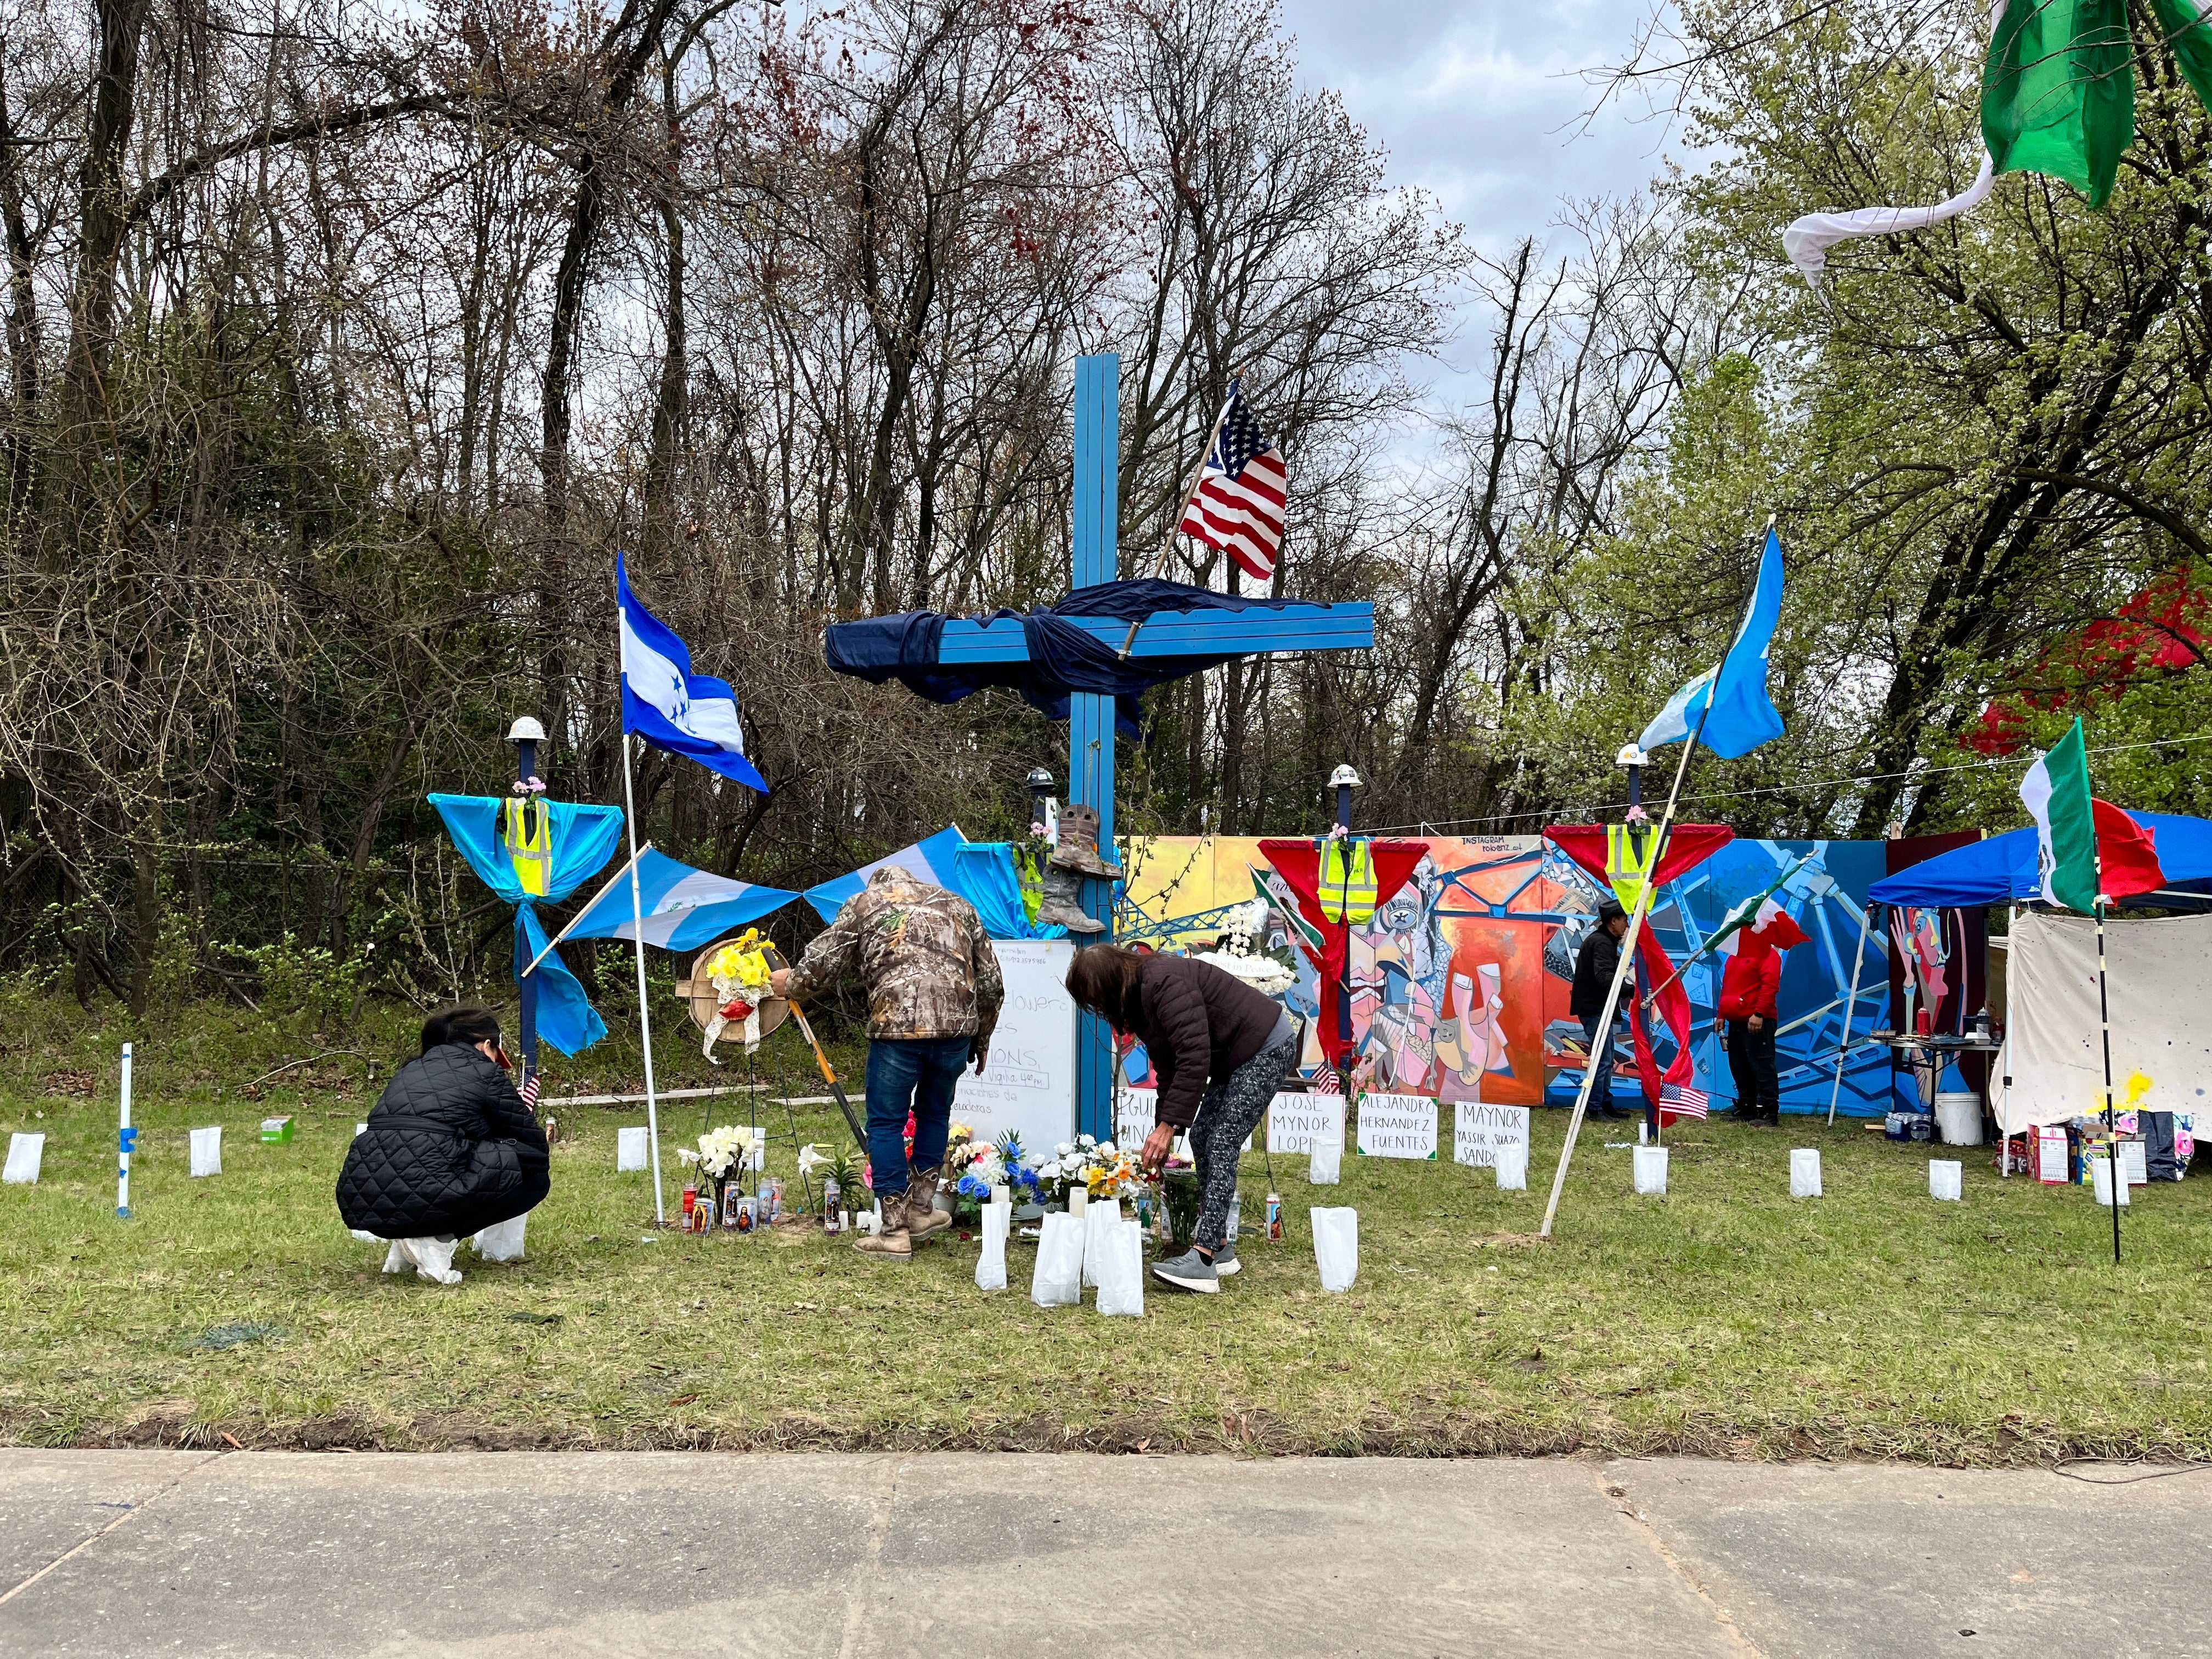 Baltimore locals working on a memorial left for the six victims of the Francis Scott Key Bridge collapse - Maynor Yasir Suazo-Sandoval, 38; Alejandro Hernandez Fuentes, 35; 26-year-old Dorlian Ronial Castillo Cabrera; Jose Mynor Lopez, 35; Miguel Luna, 49, and one who had not been identified